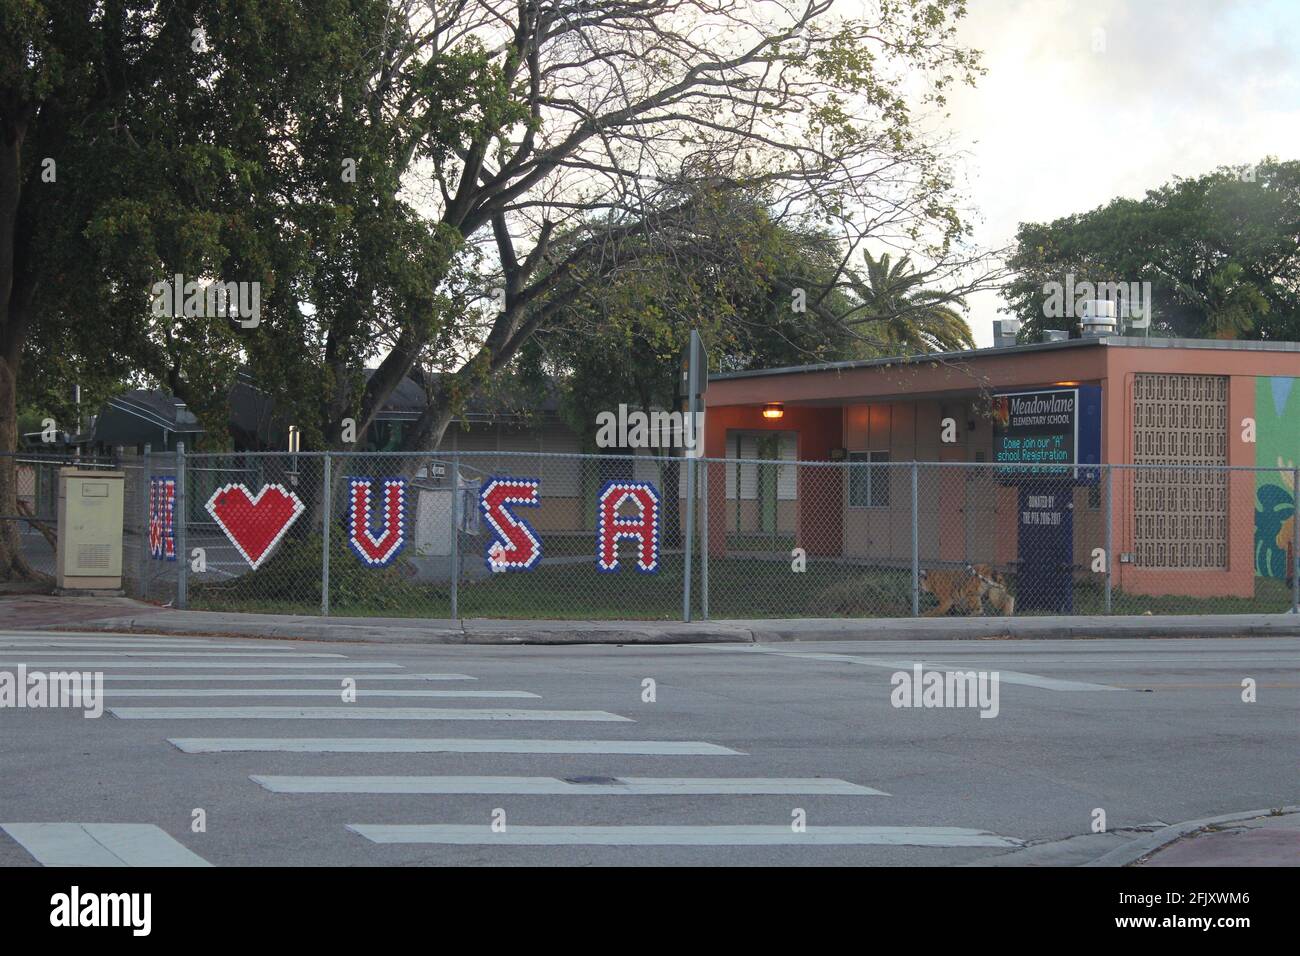 Meadowlane Elementary School in Hialeah, Florida displaying a 'We love USA' sign on a fence, showing patriotism. Stock Photo